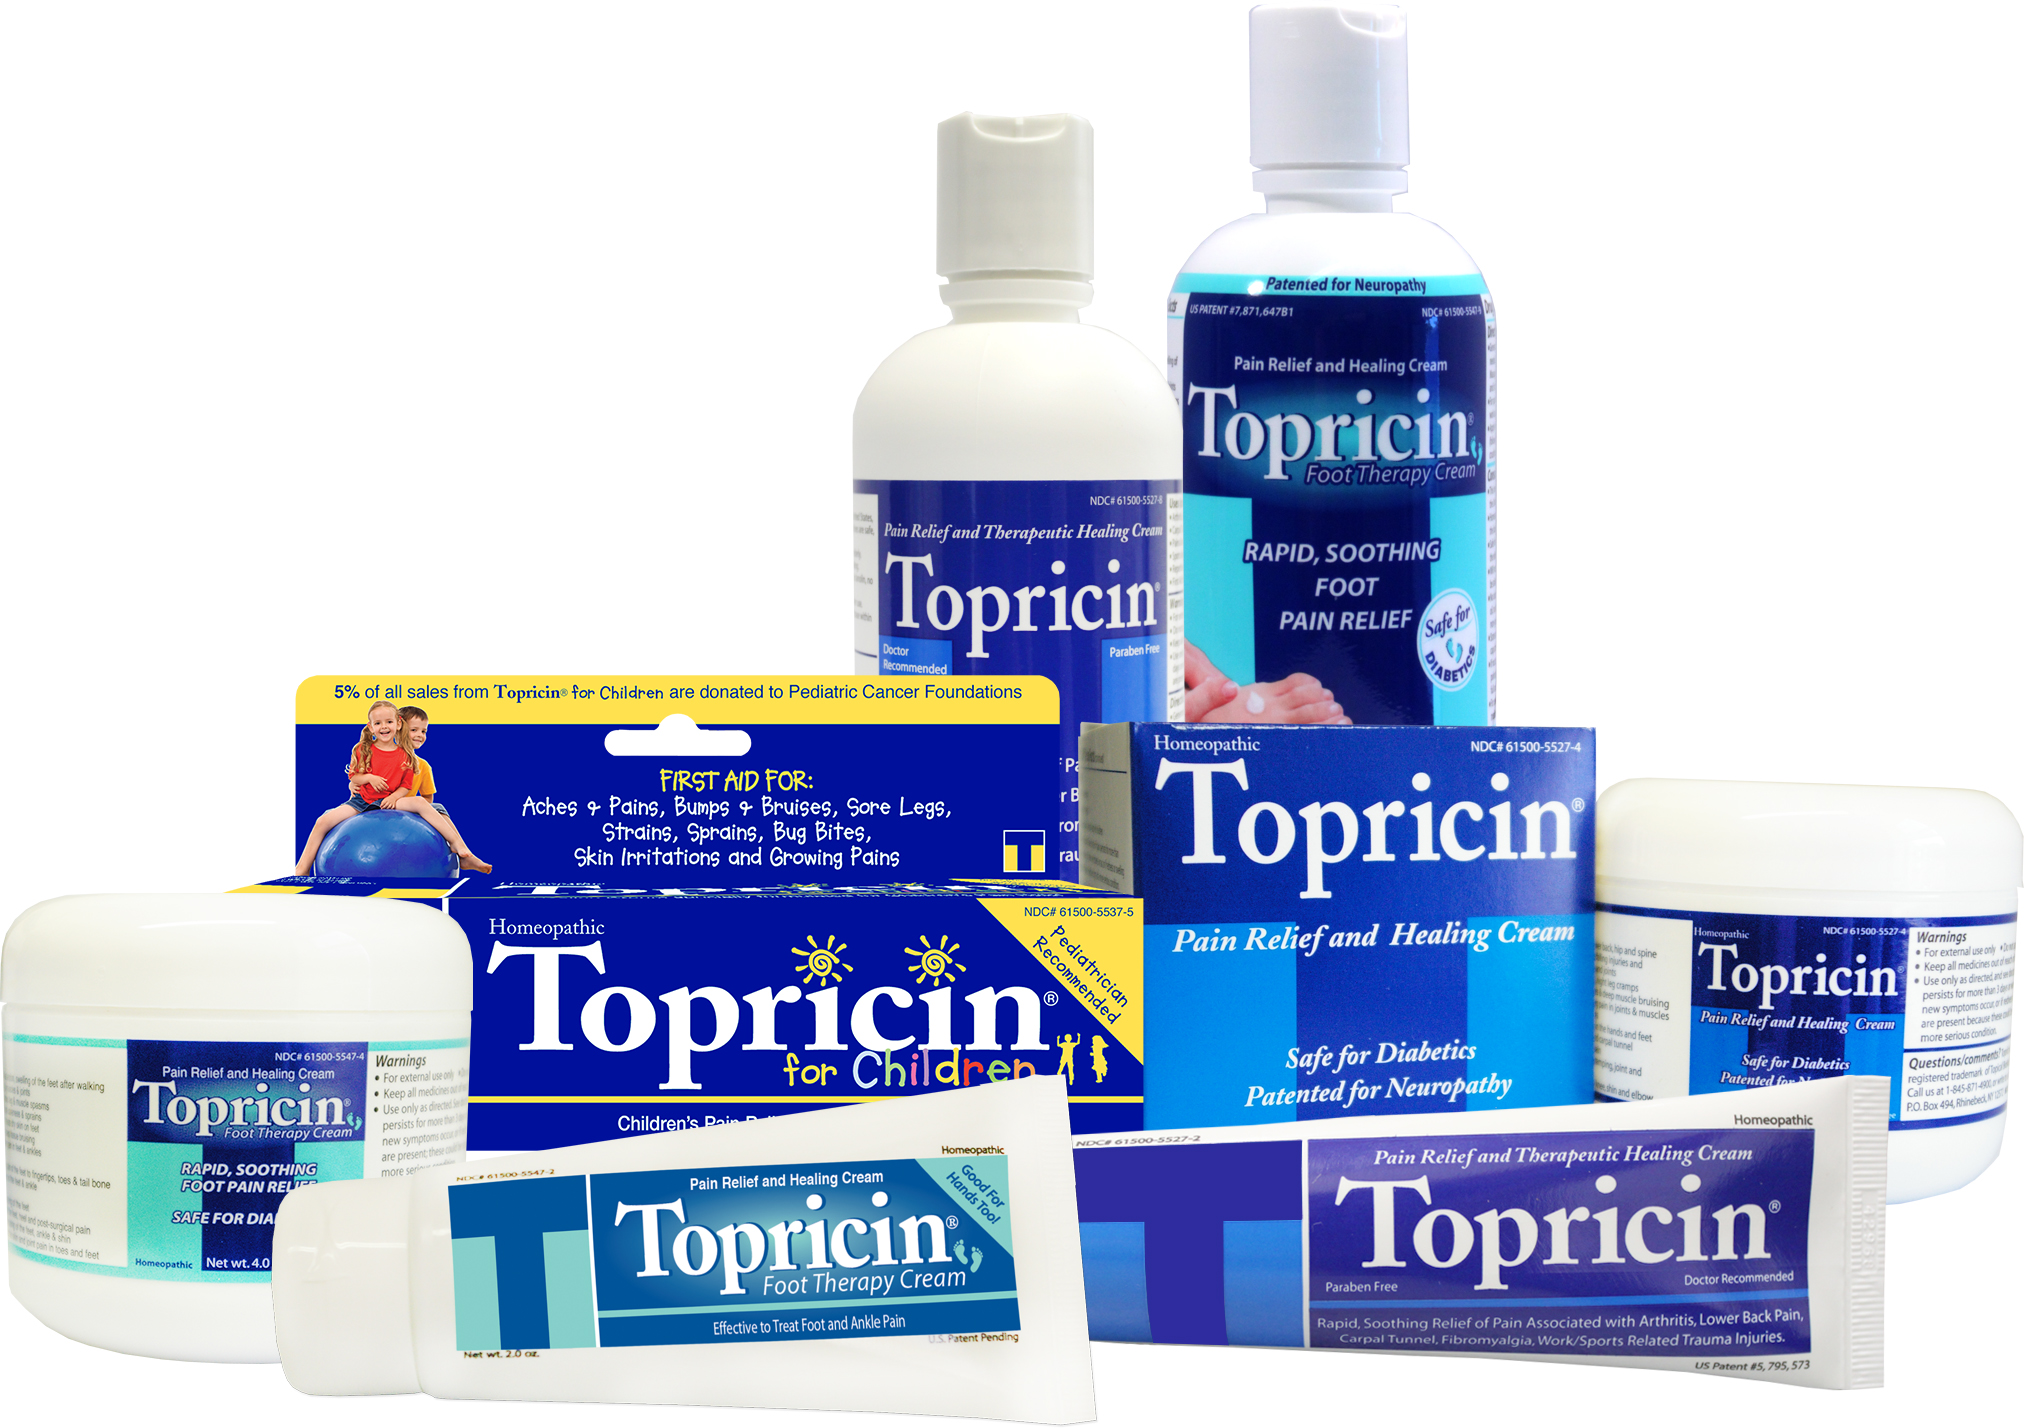 Offer safe and natural Topricin as a treat!